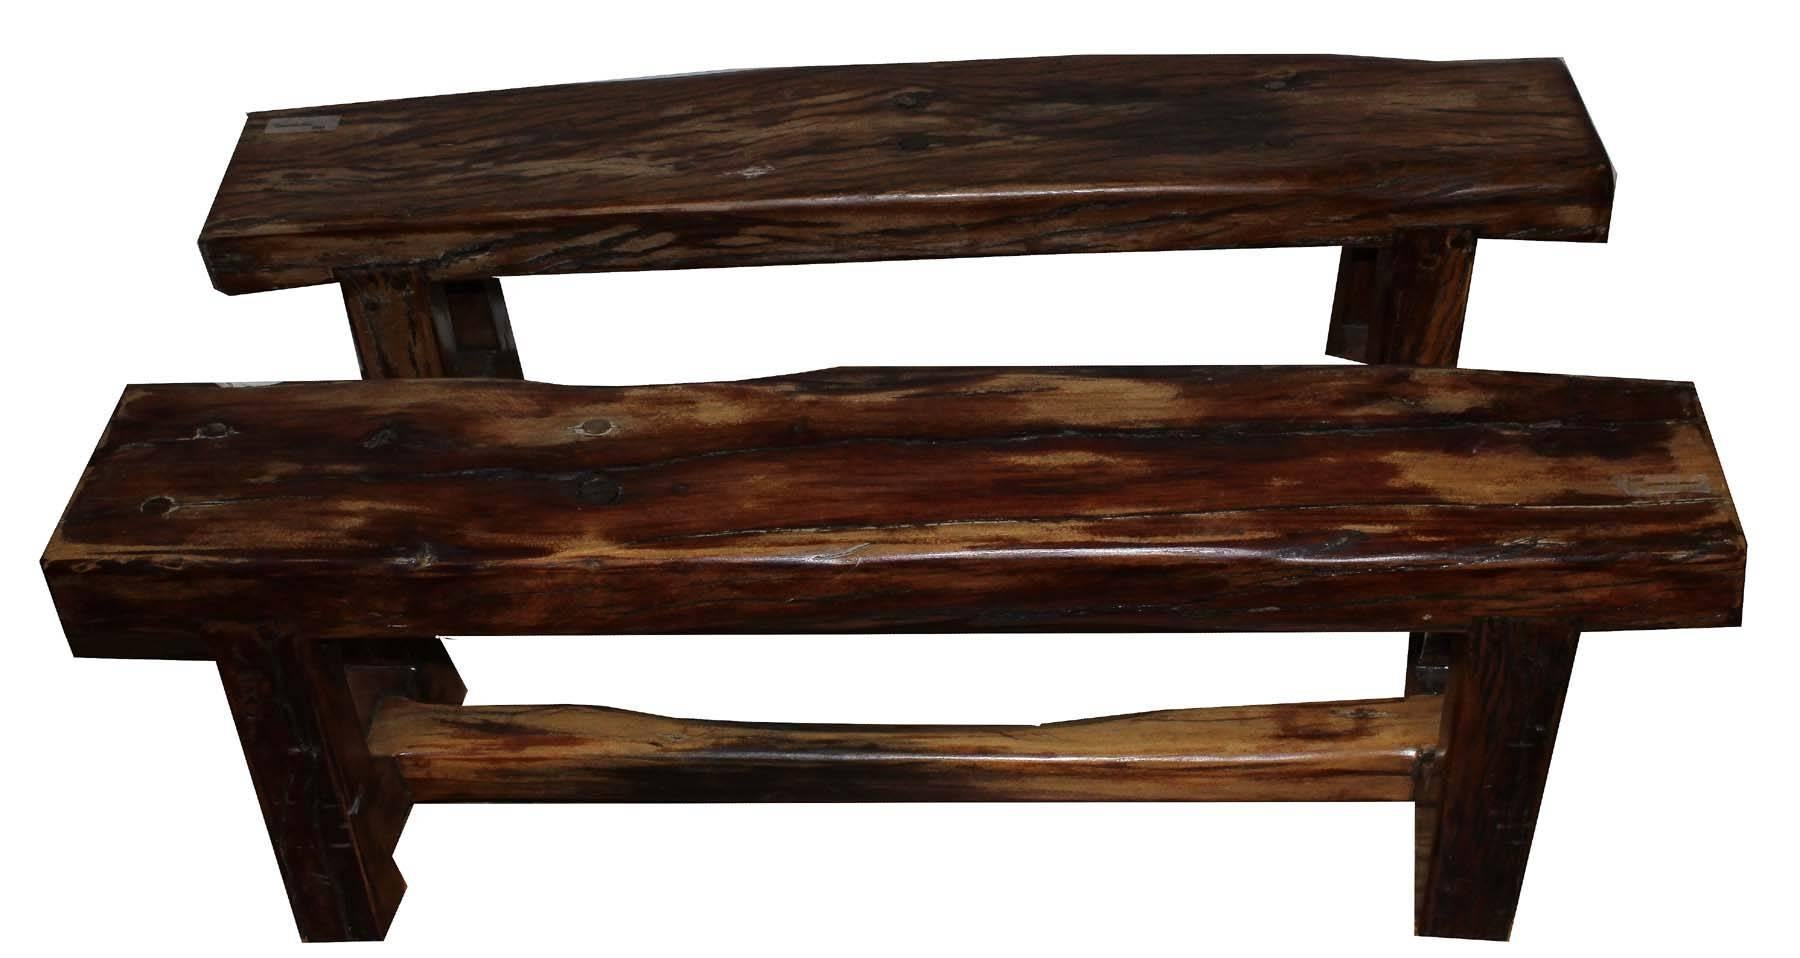 These benches where made from railroad ties used in the construction of the steam railways of central Africa. They are made from rich teak wood thick with natural oils and a beautiful natural patina. Each bench is constructed by hand with Primitive